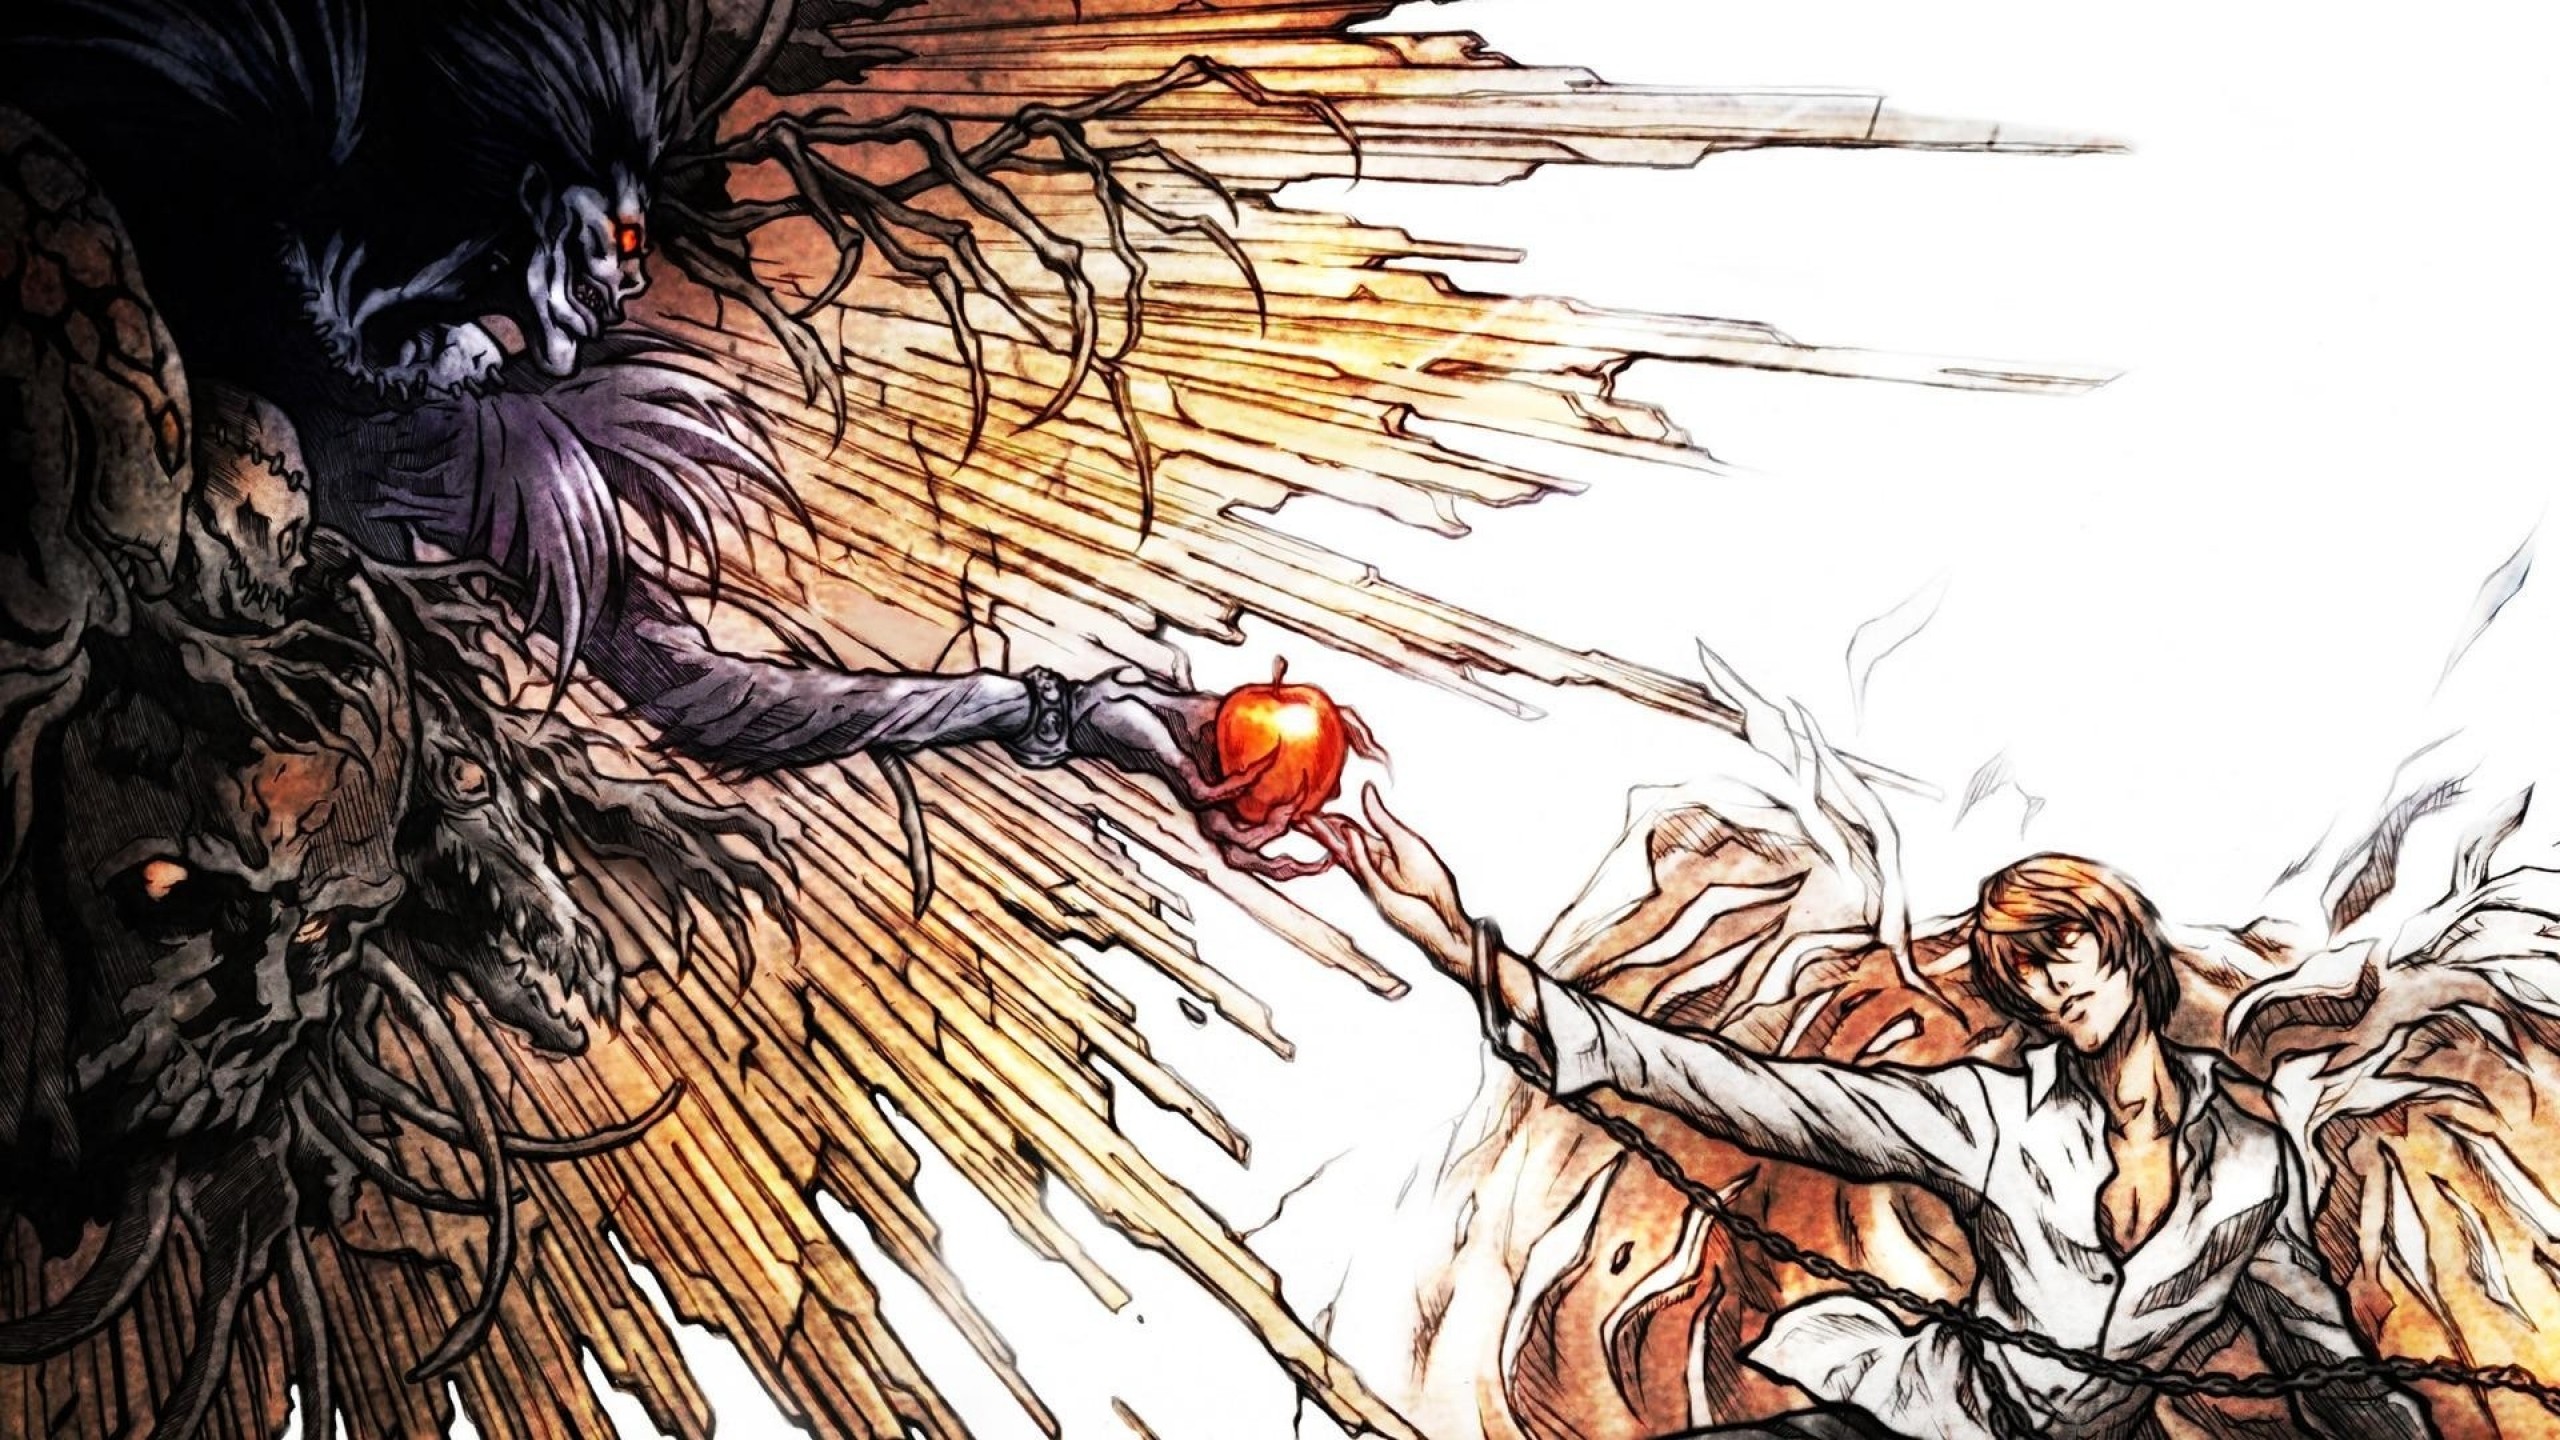 Death Note Yagami Light Ryuk The Creation Of Adam Parody Death Note Yagami Light Ryuk Anime 2560x1440